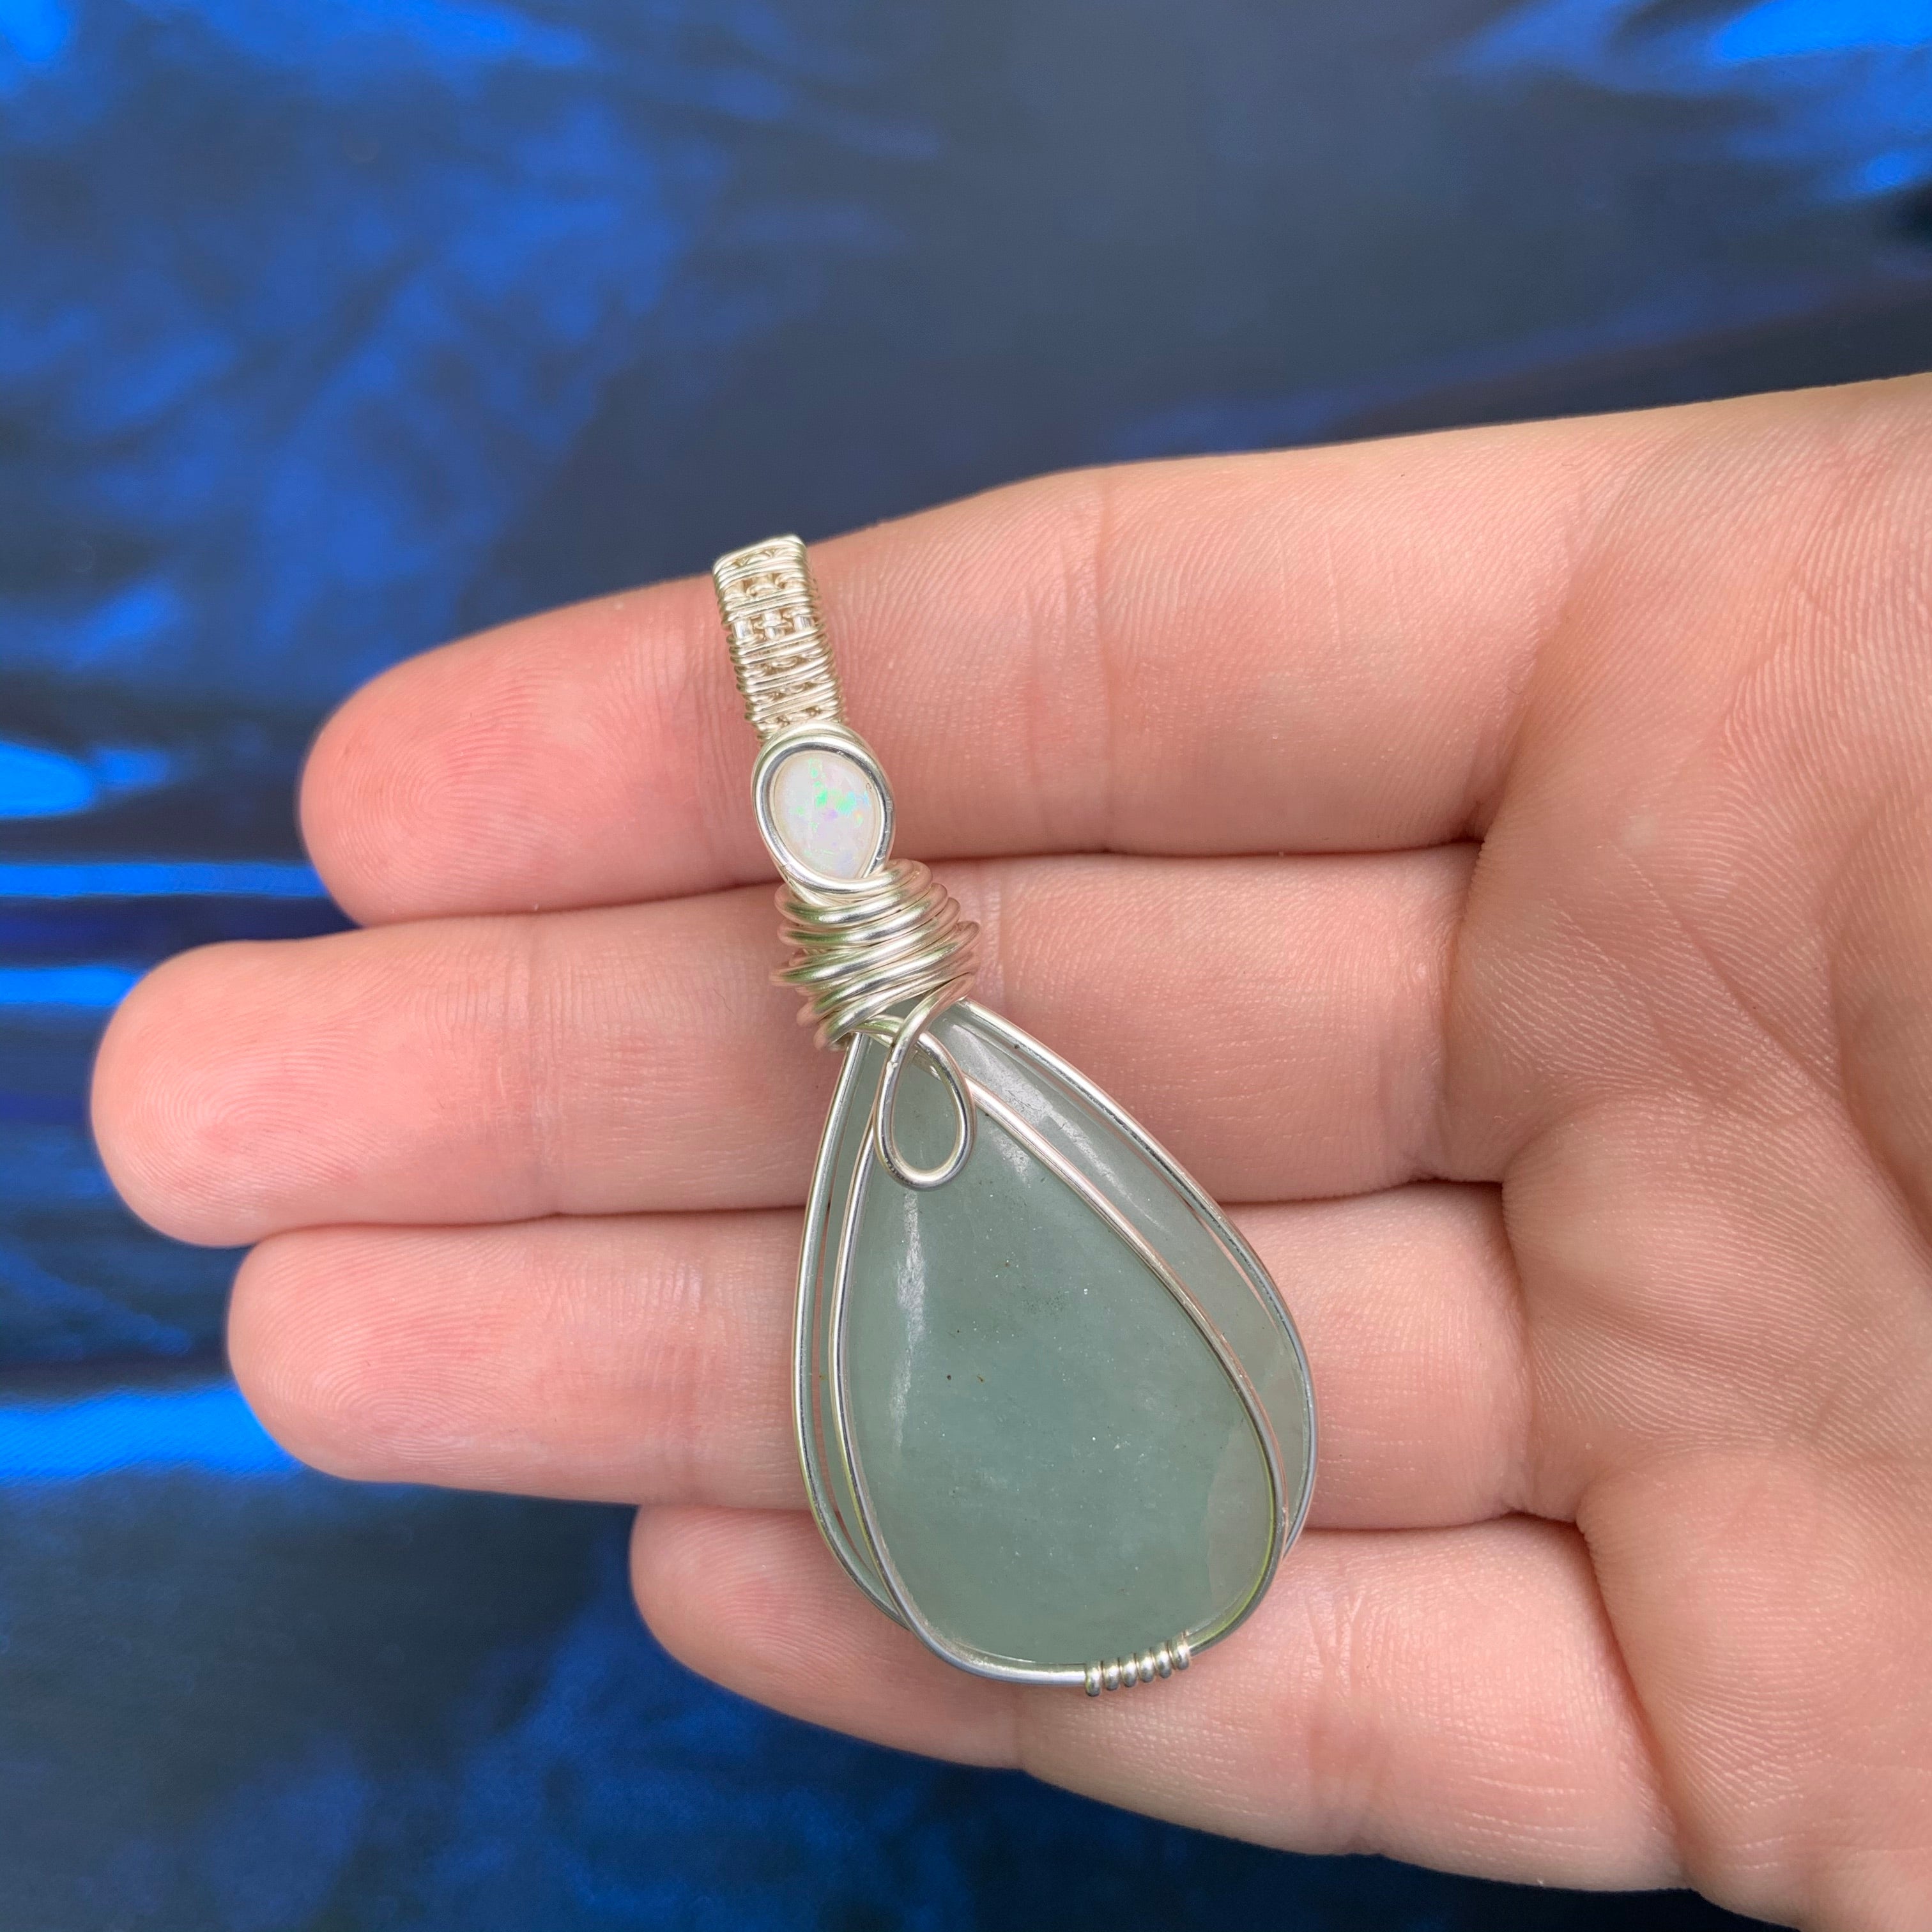 Wire wrapped heart shaped adjustable seaglass necklace